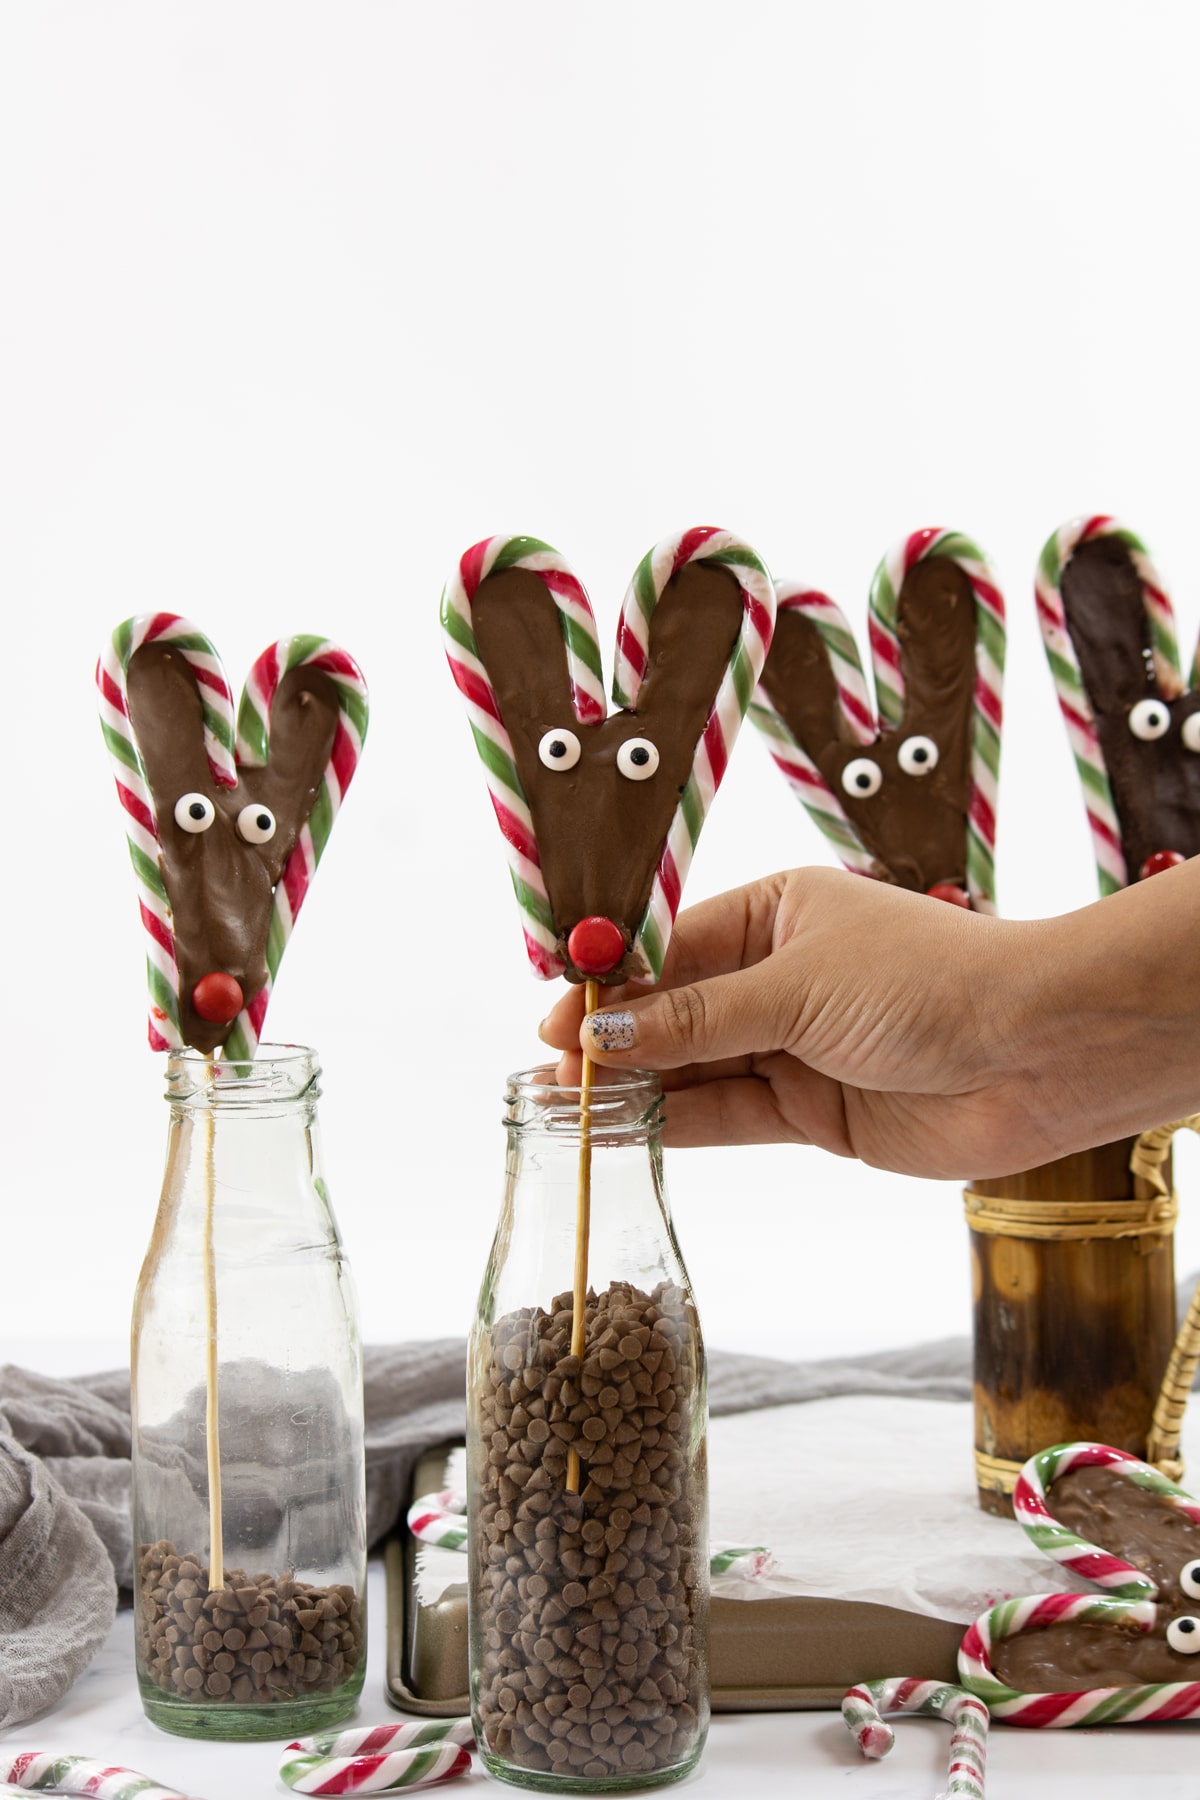 Candy Cane Reindeer with chocolate jars